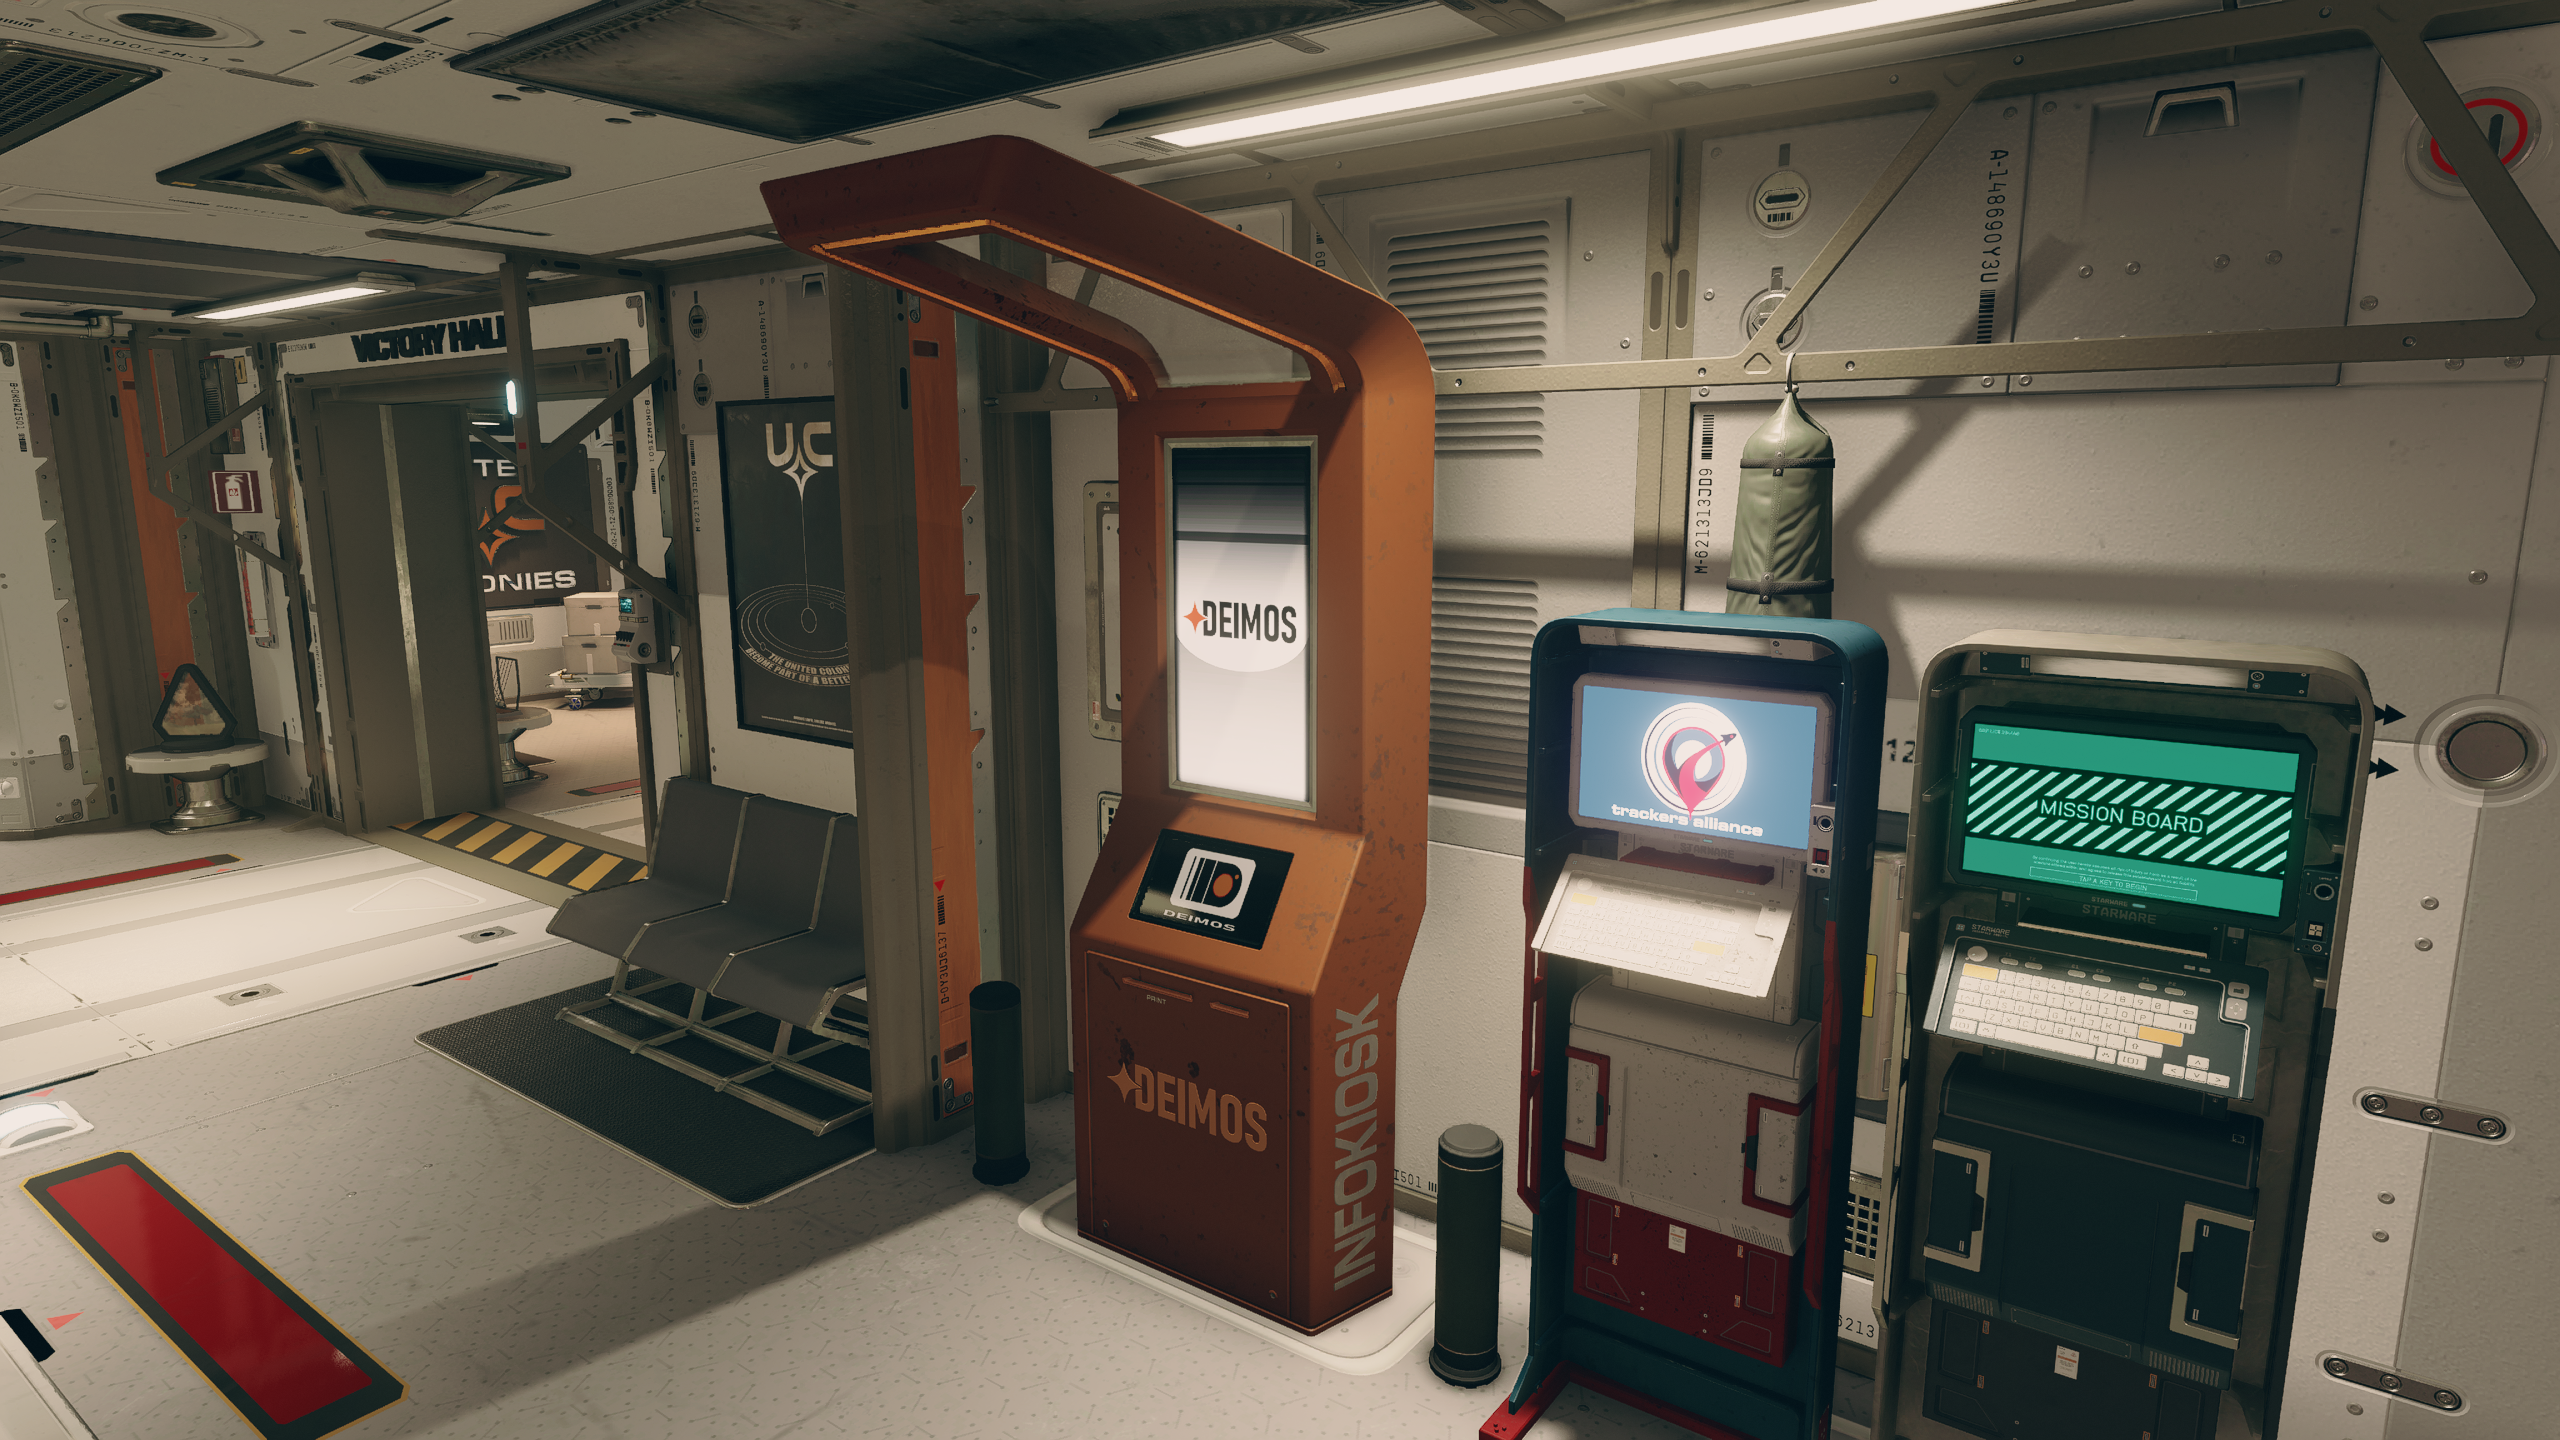 The Deimos Staryard Mission Board and Bounty Clearance Kiosk next to each other in Starfield.